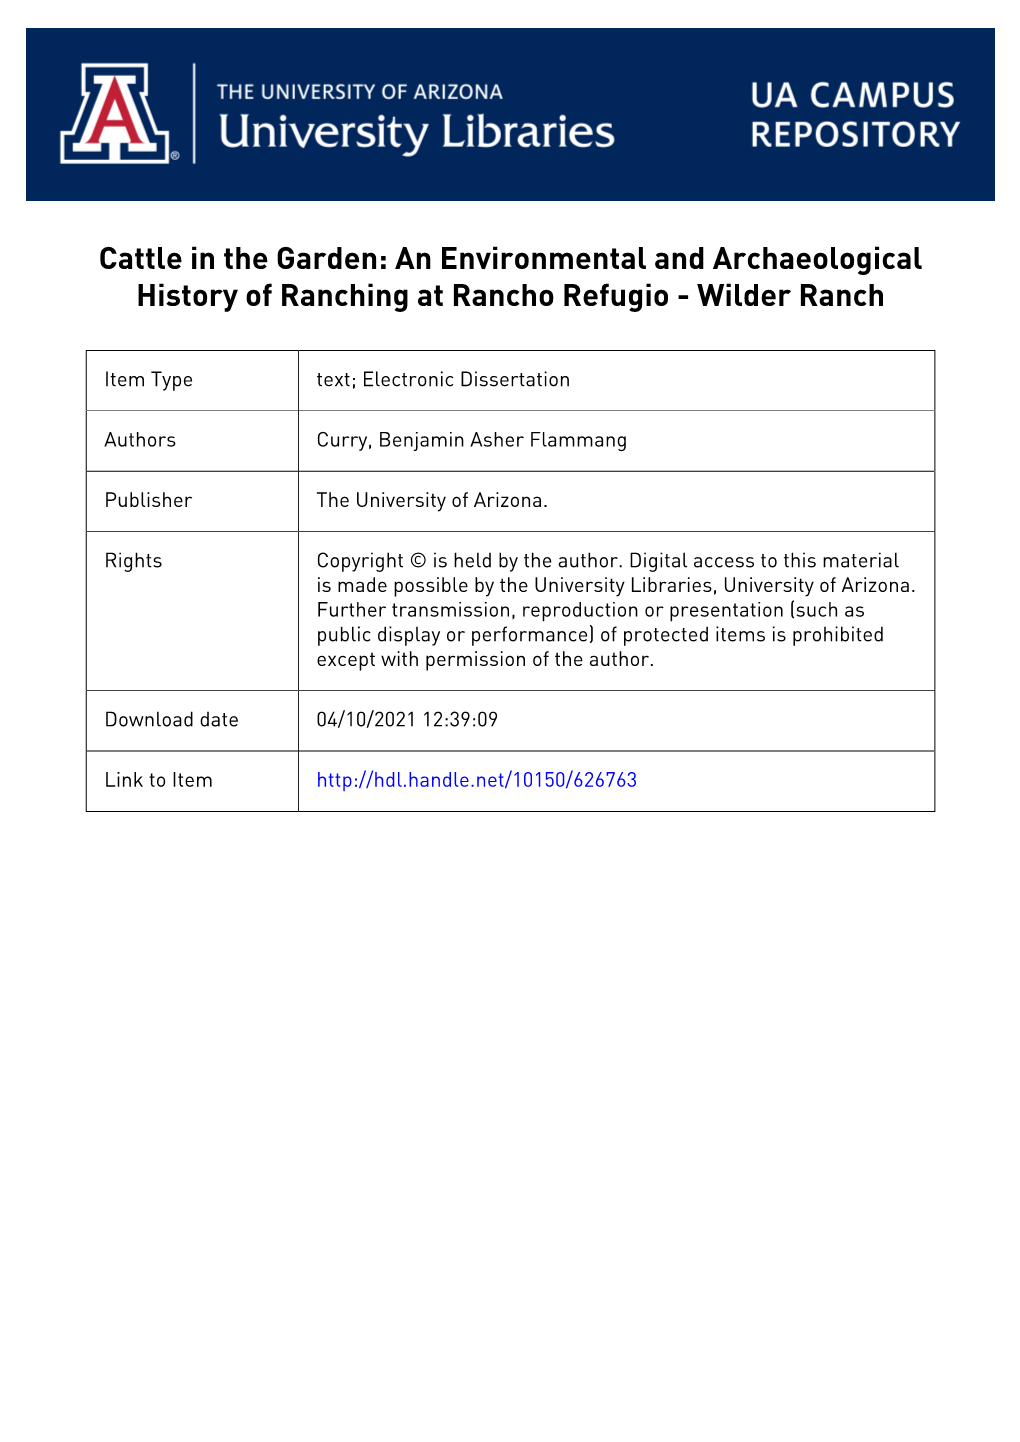 Cattle in the Garden: an Environmental and Archaeological History of Ranching at Rancho Refugio - Wilder Ranch